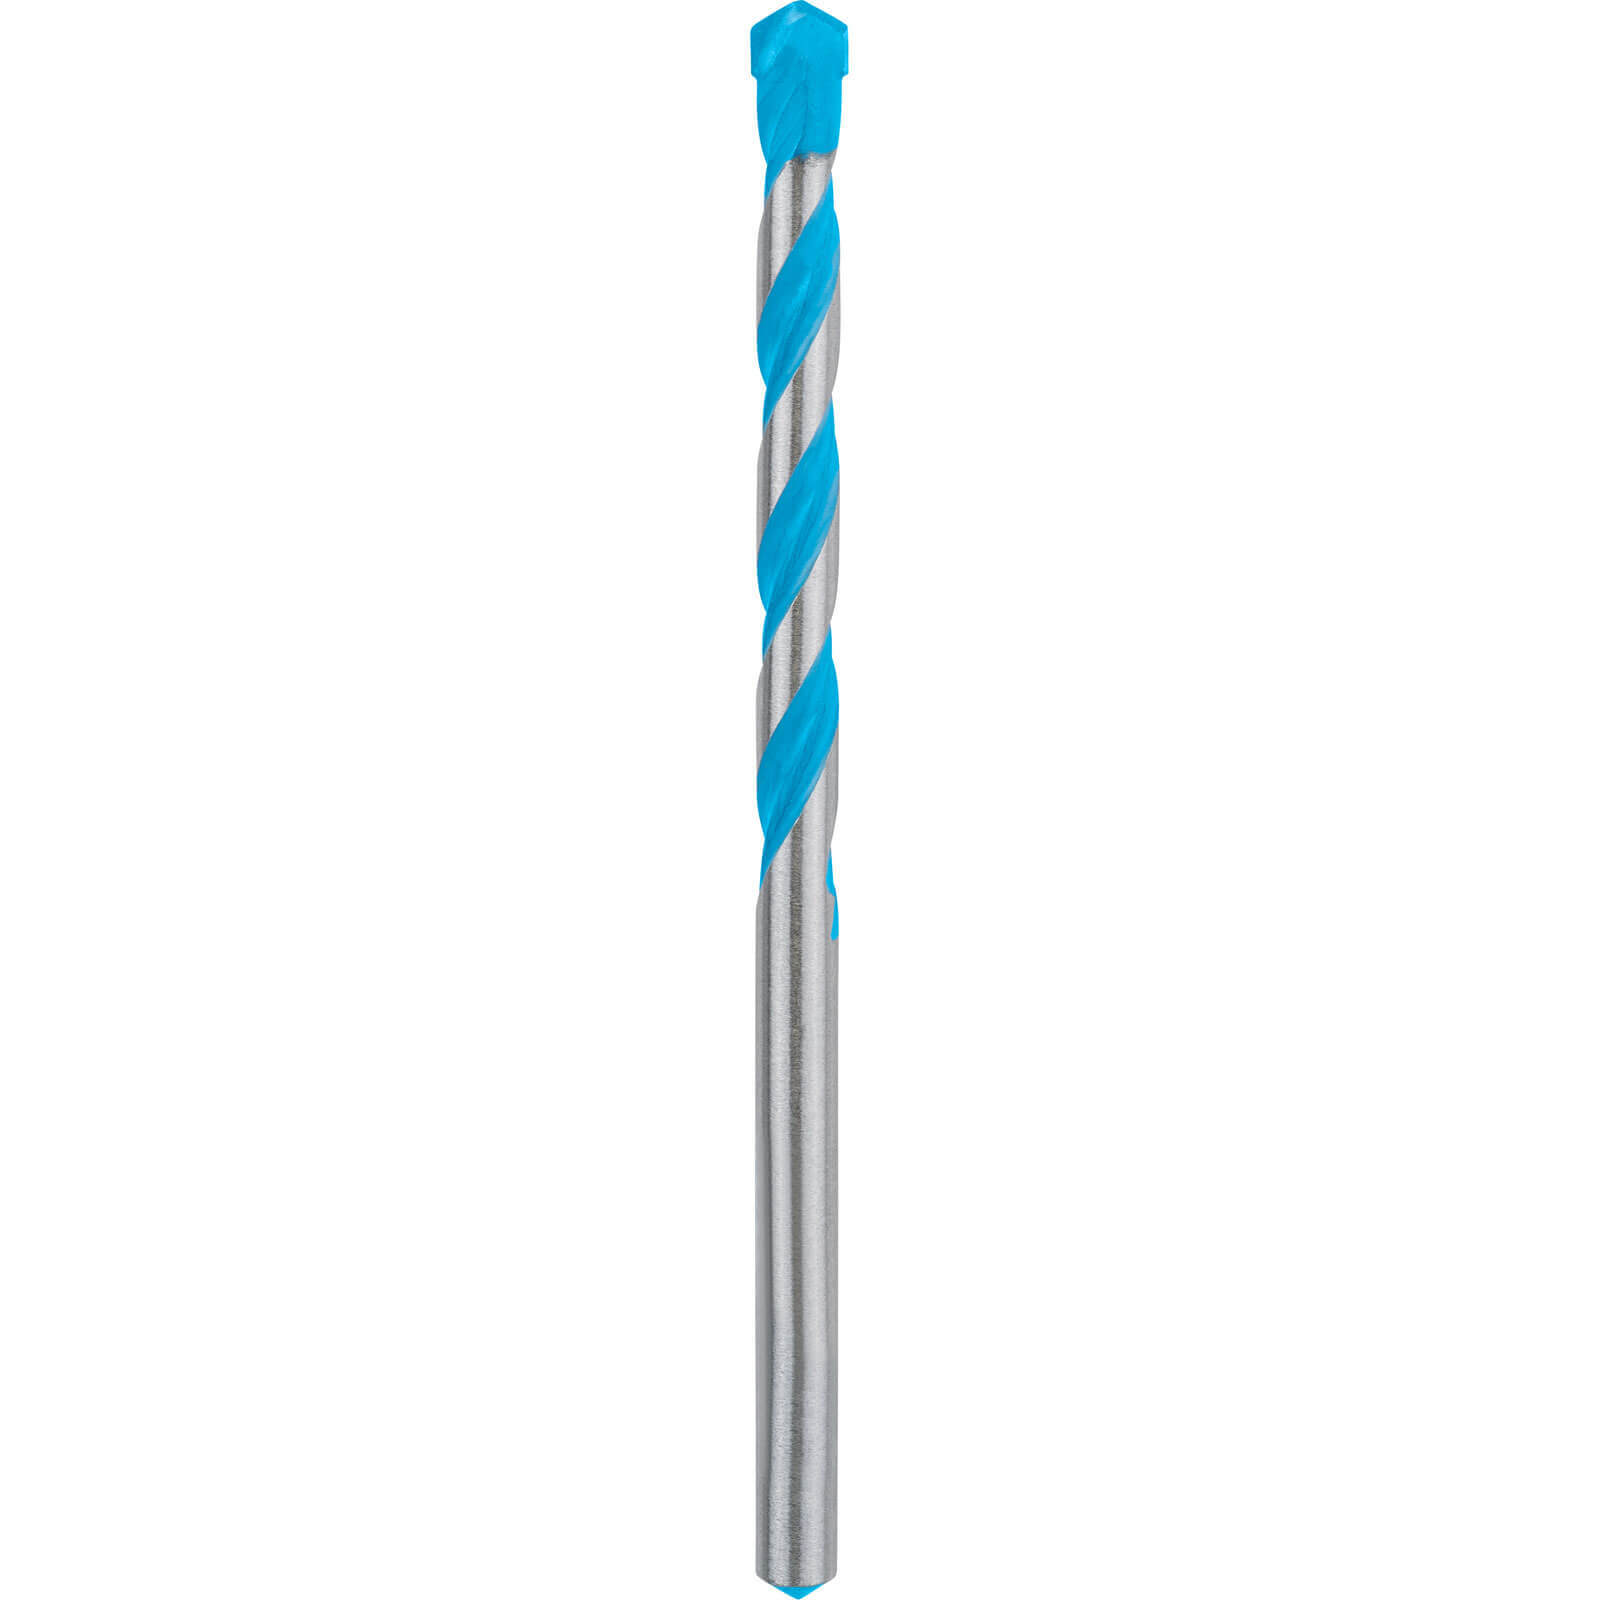 Photo of Bosch Expert Cyl-9 Multi Construction Drill Bit 5mm 85mm Pack Of 10